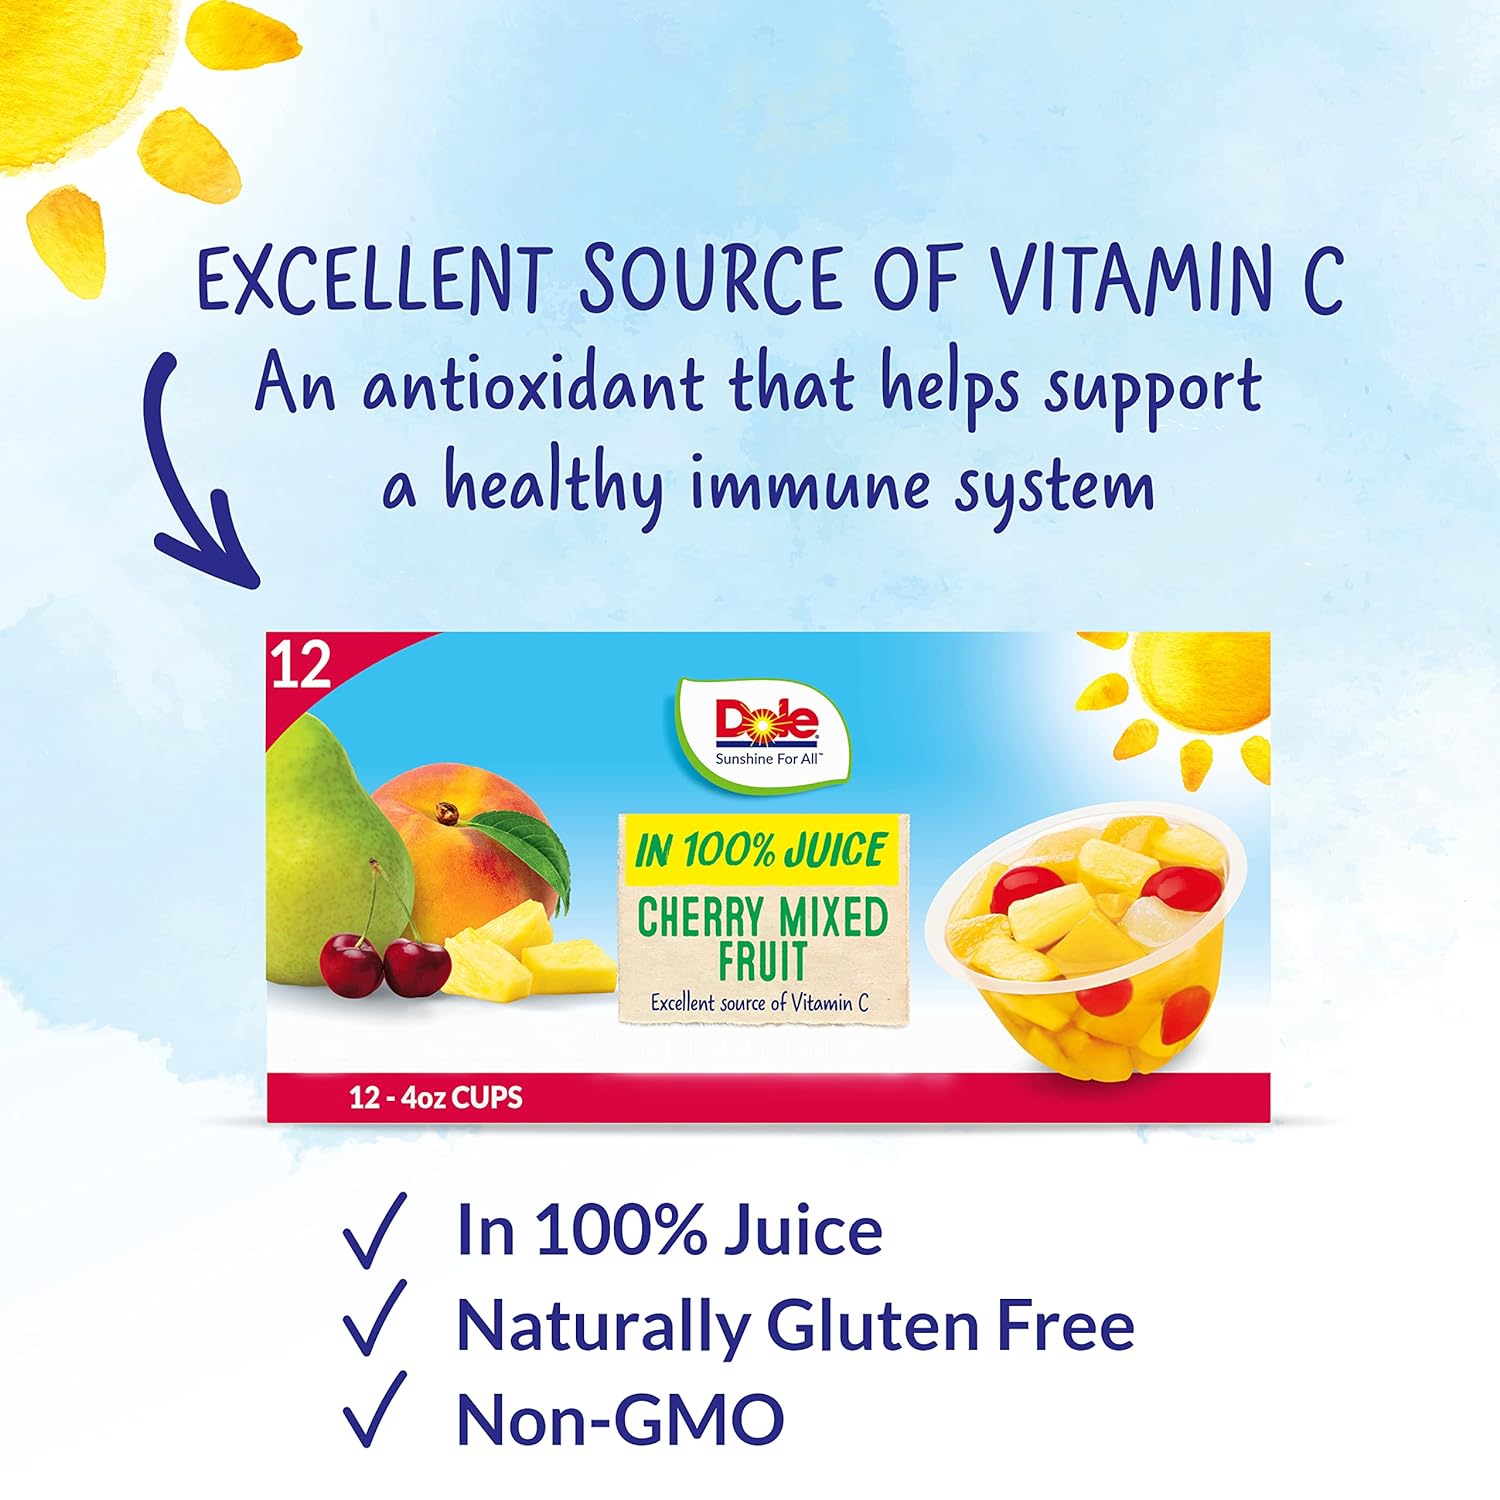 Dole Fruit Bowls Snacks Cherry Mixed Fruit in 100% Juice Snacks, 4oz 12 Total Cups, Gluten & Dairy Free, Bulk Lunch Snacks for Kids & Adults